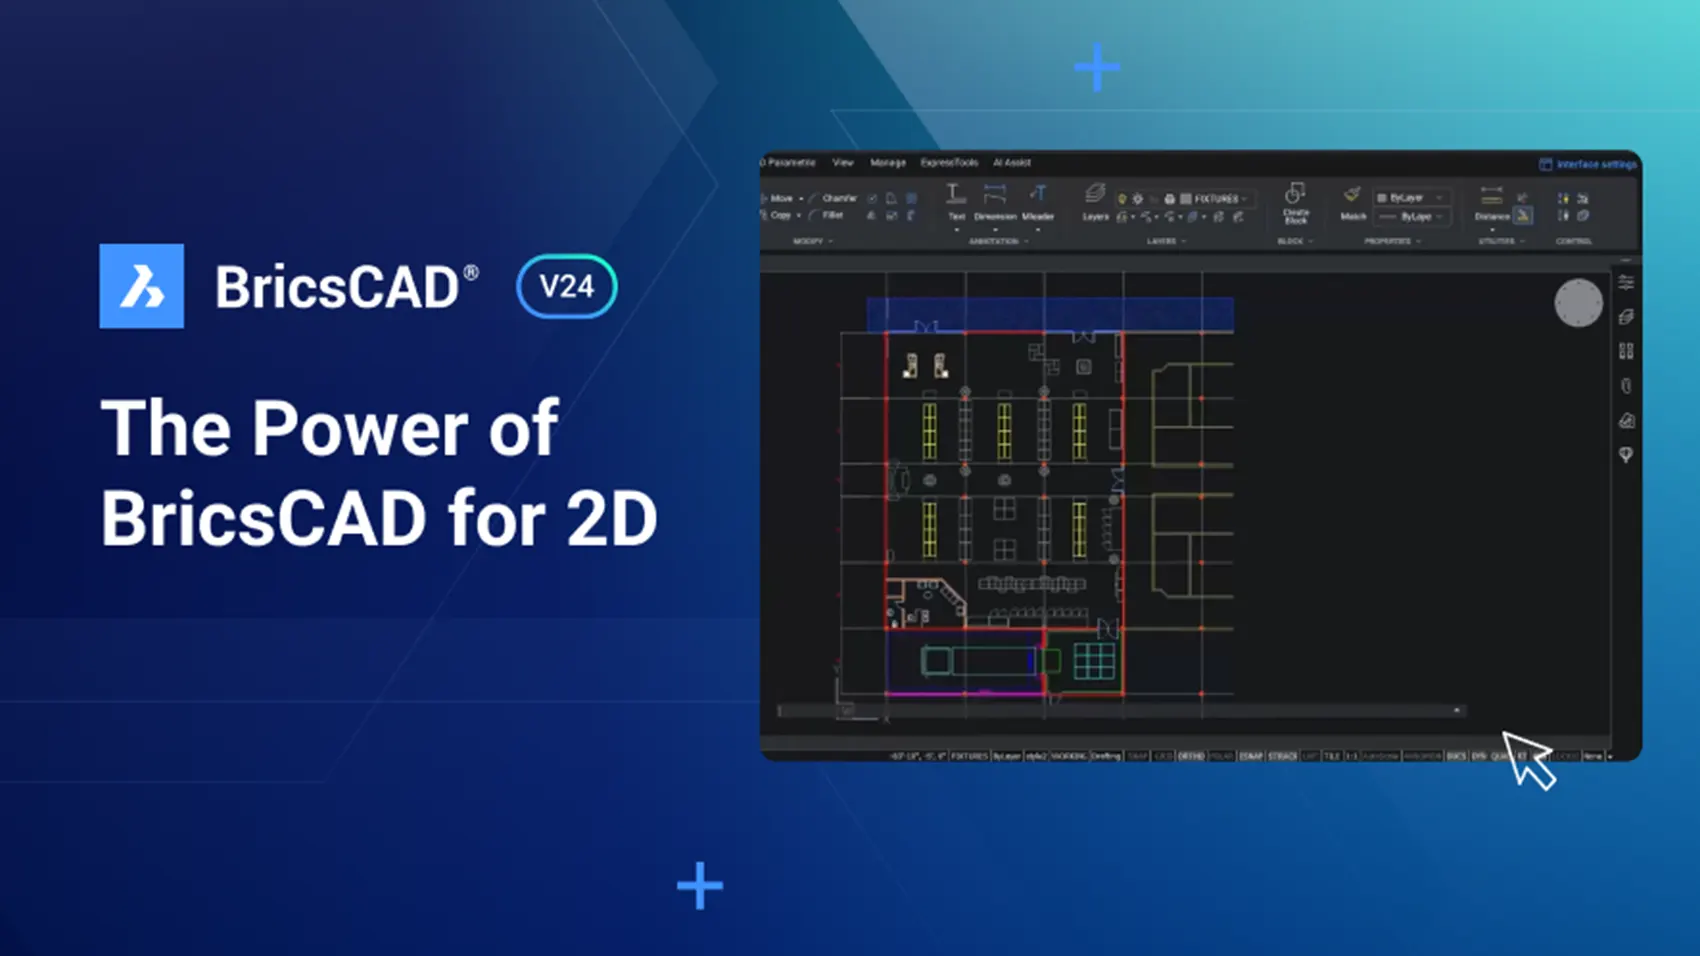 The Power of BricsCAD® V24 for 2D